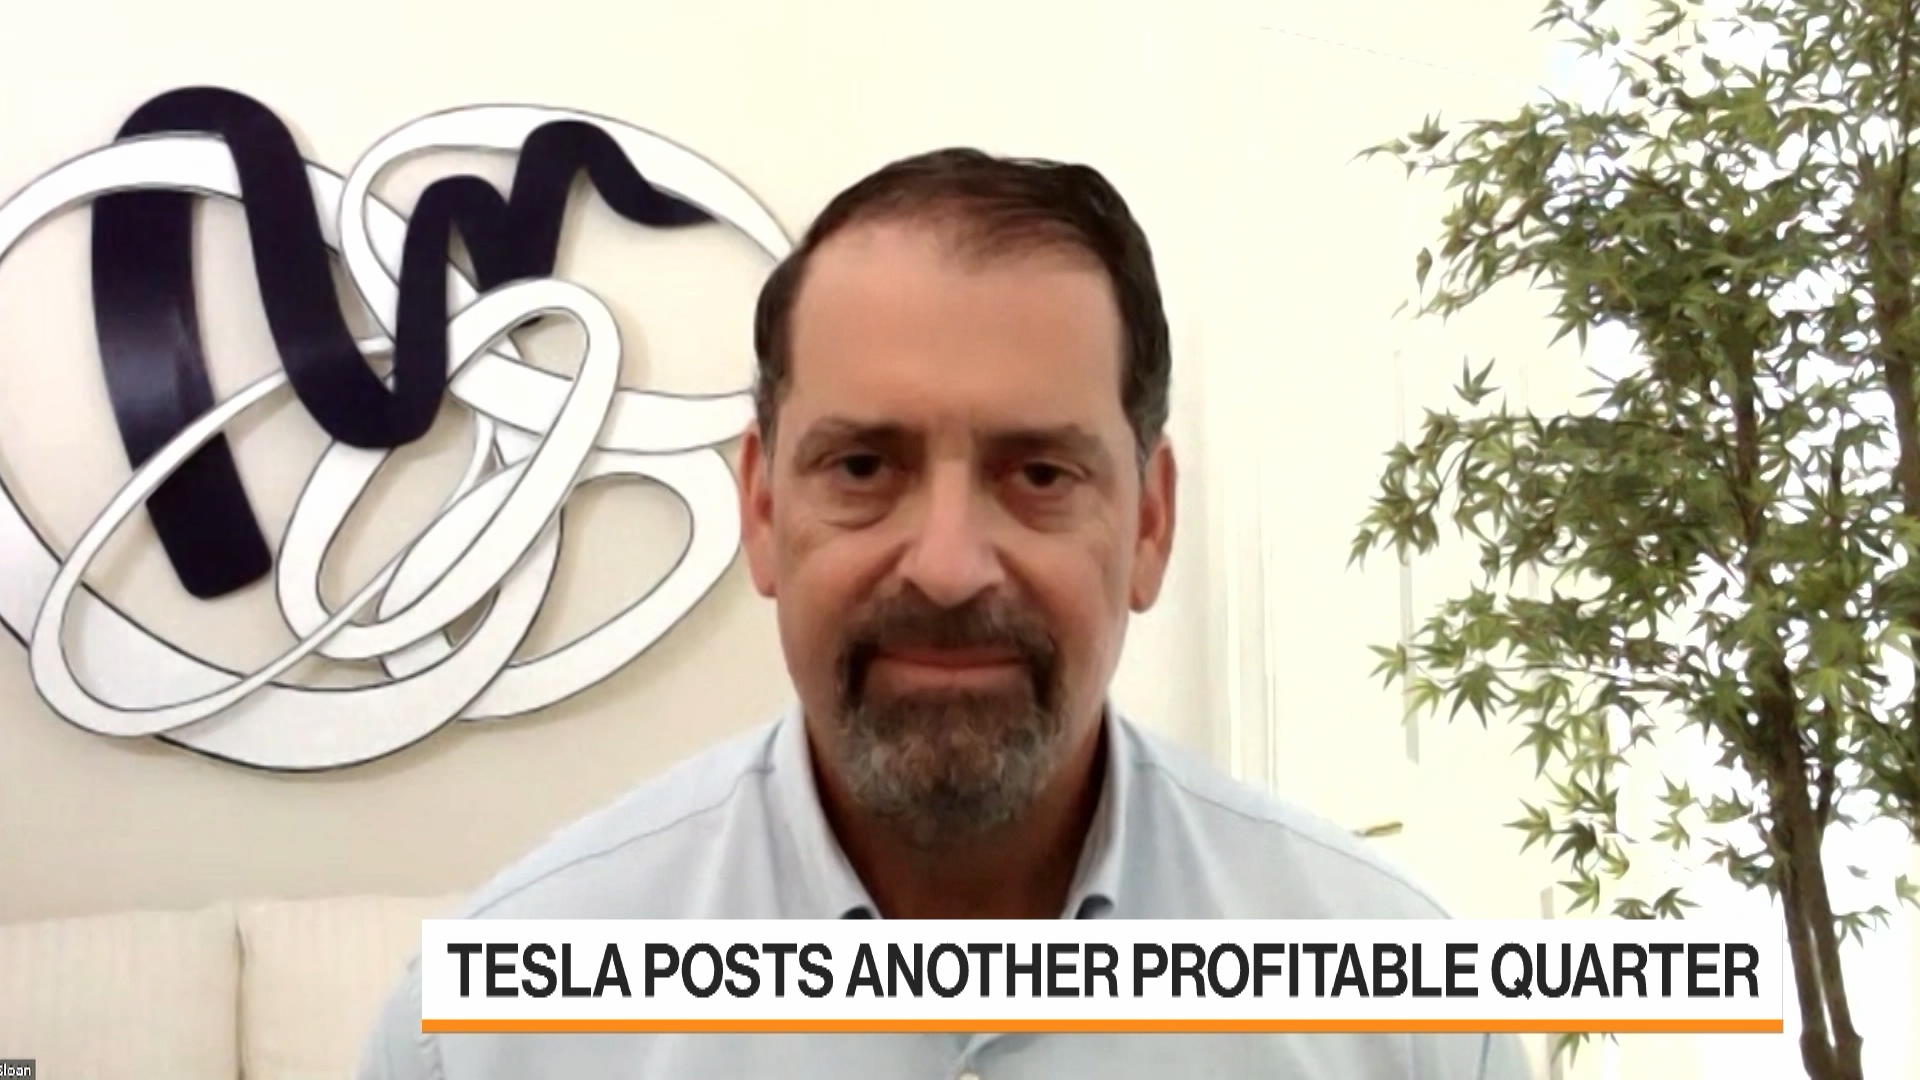 Tesla Stock Will Go to Mars Before SpaceX, Says S3 Partners Founder